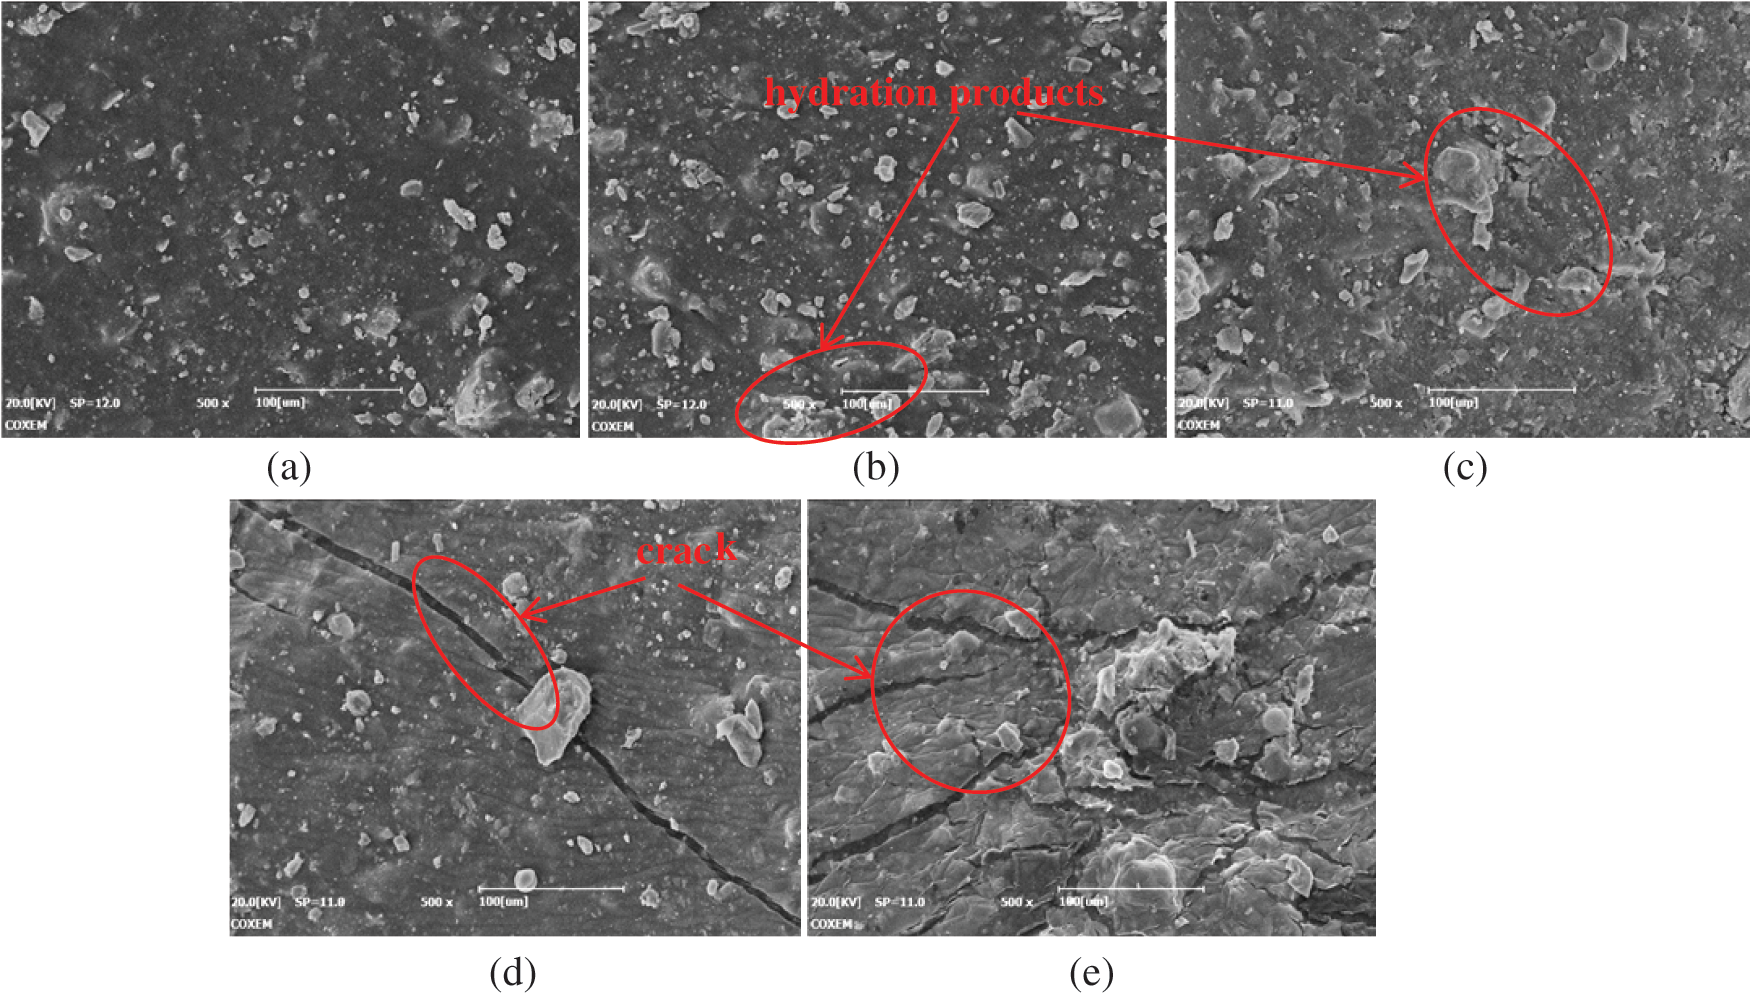 Images Journal Of Renewable Materials Images Doi 10 Jrm 21 Article Effect Of Ultraviolet Aging On The Bonding And Tensile Properties Of Polymer Cement Composite Zhihang Wang1 Jinyu Xu1 2 Xin Meng1 And Congjin Zhu1 1air